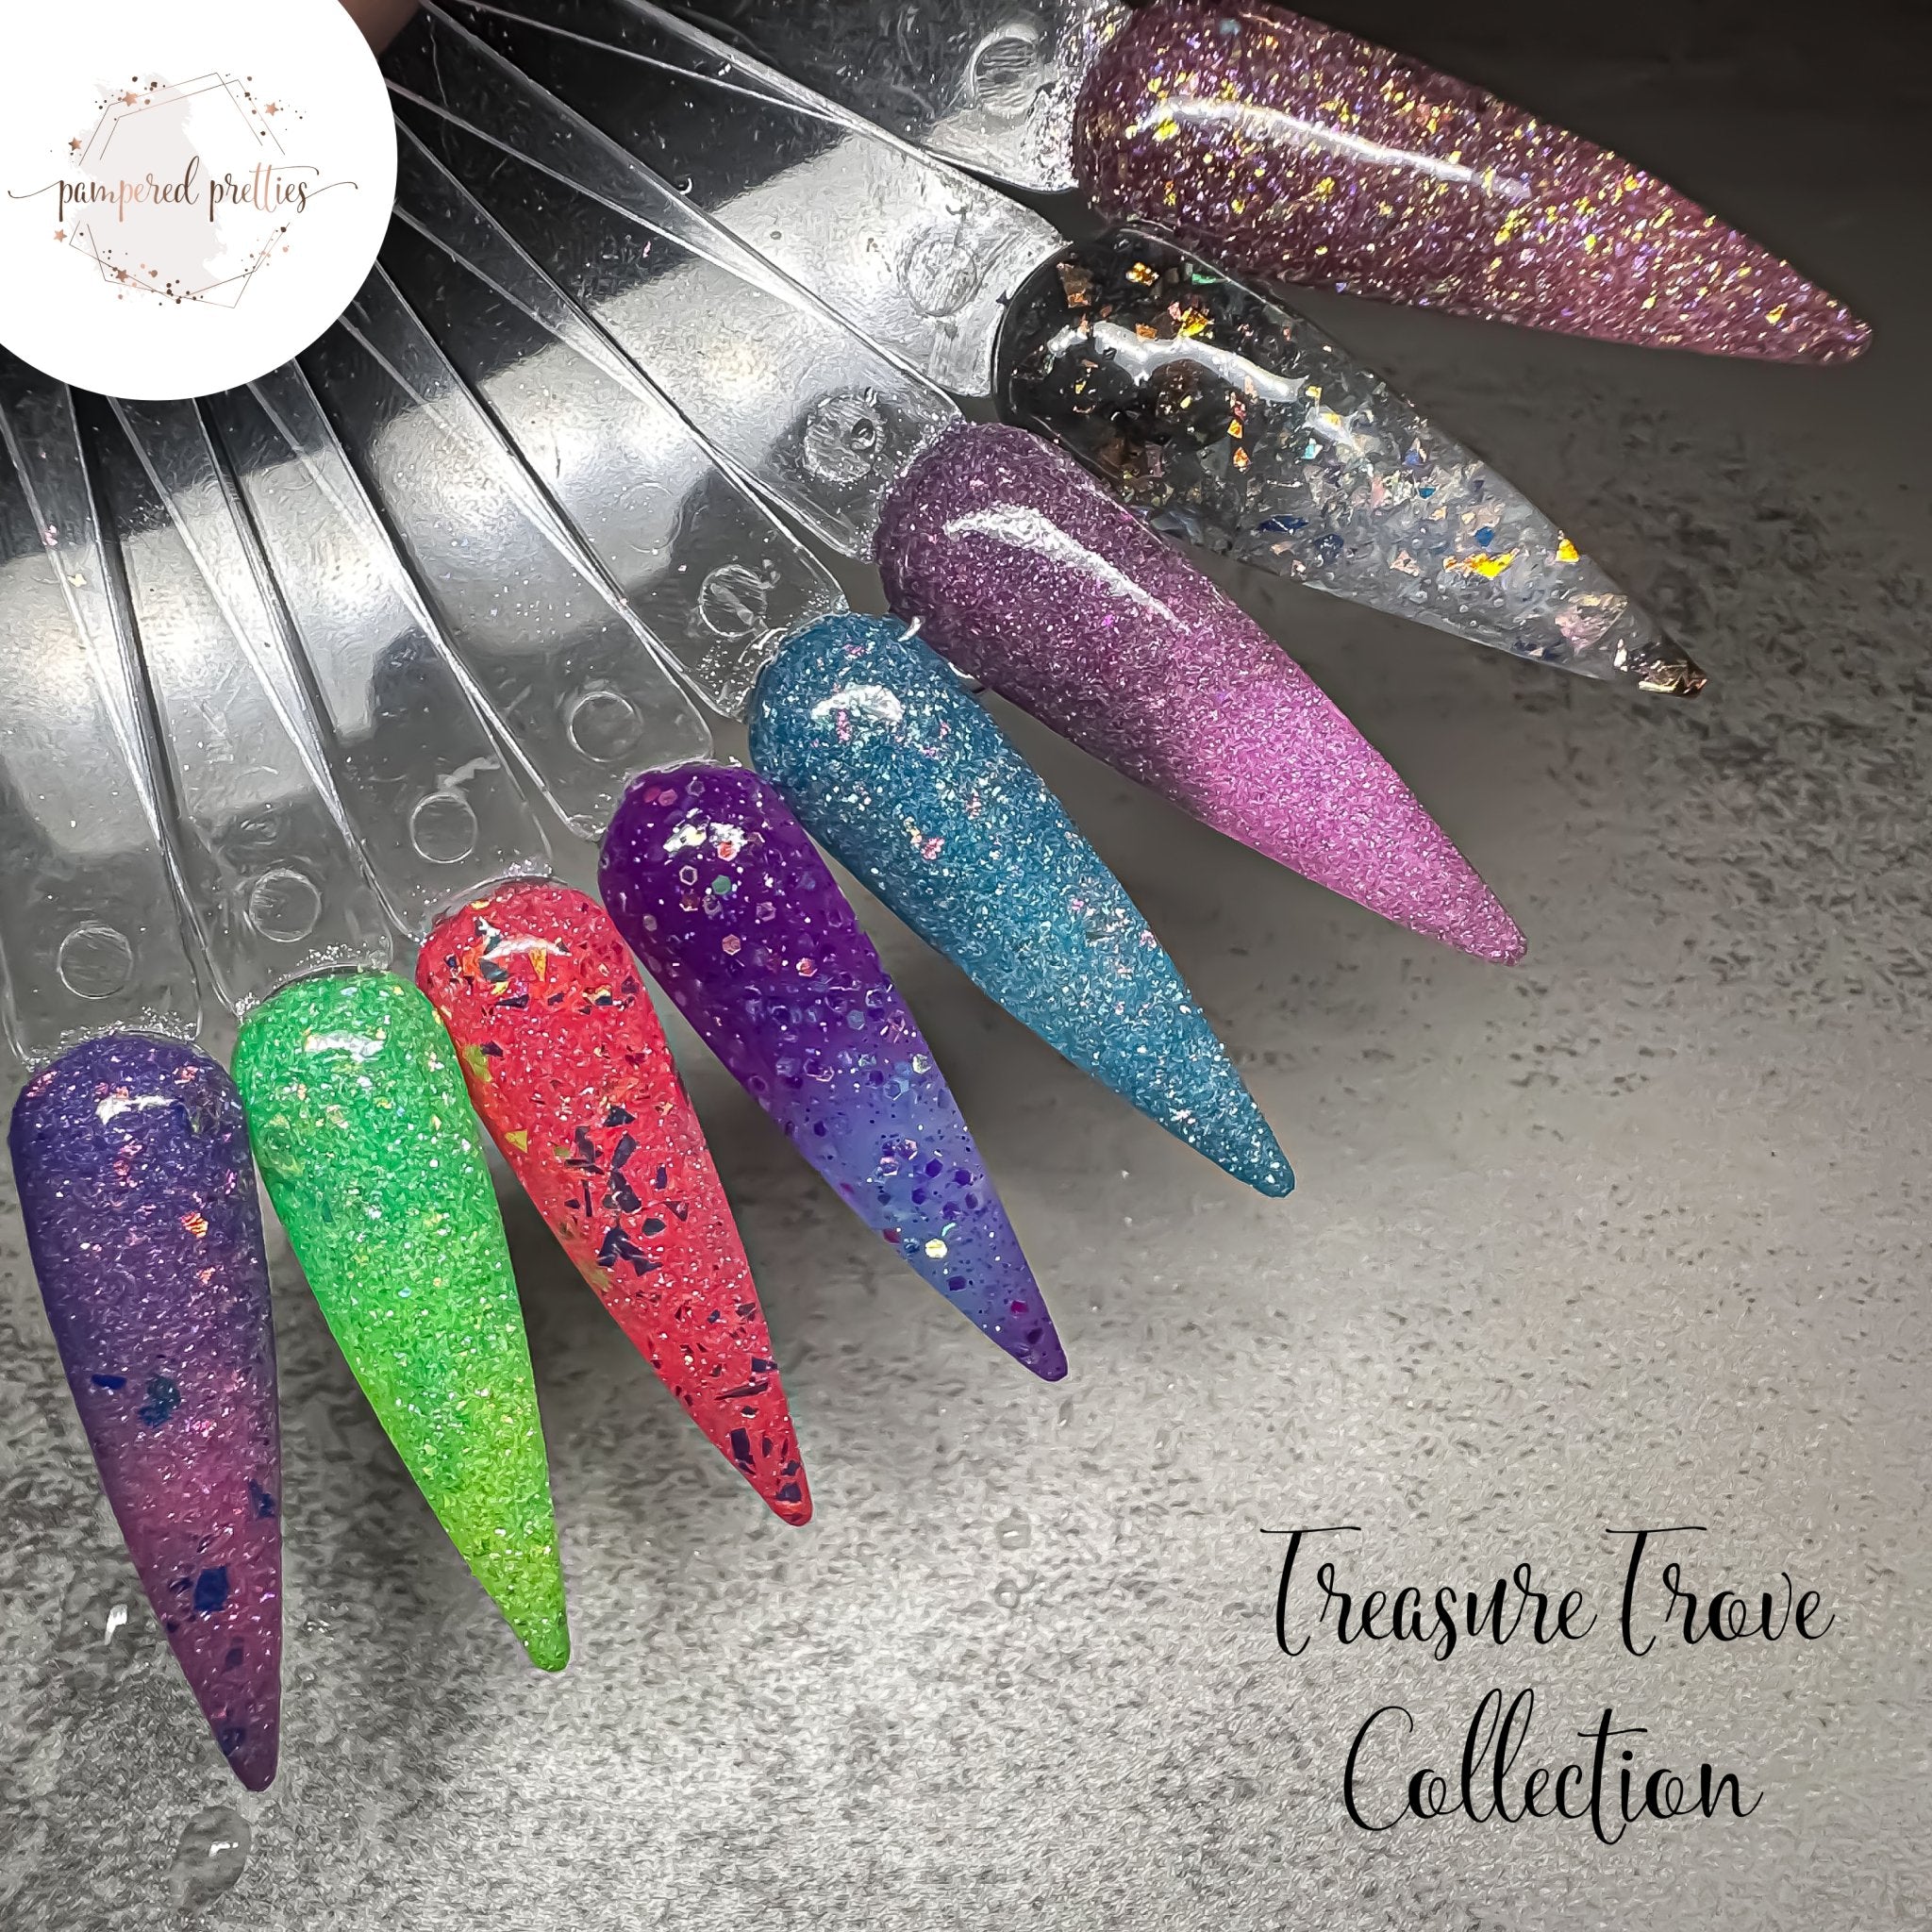 Treasure Trove Collection - Pampered Pretties